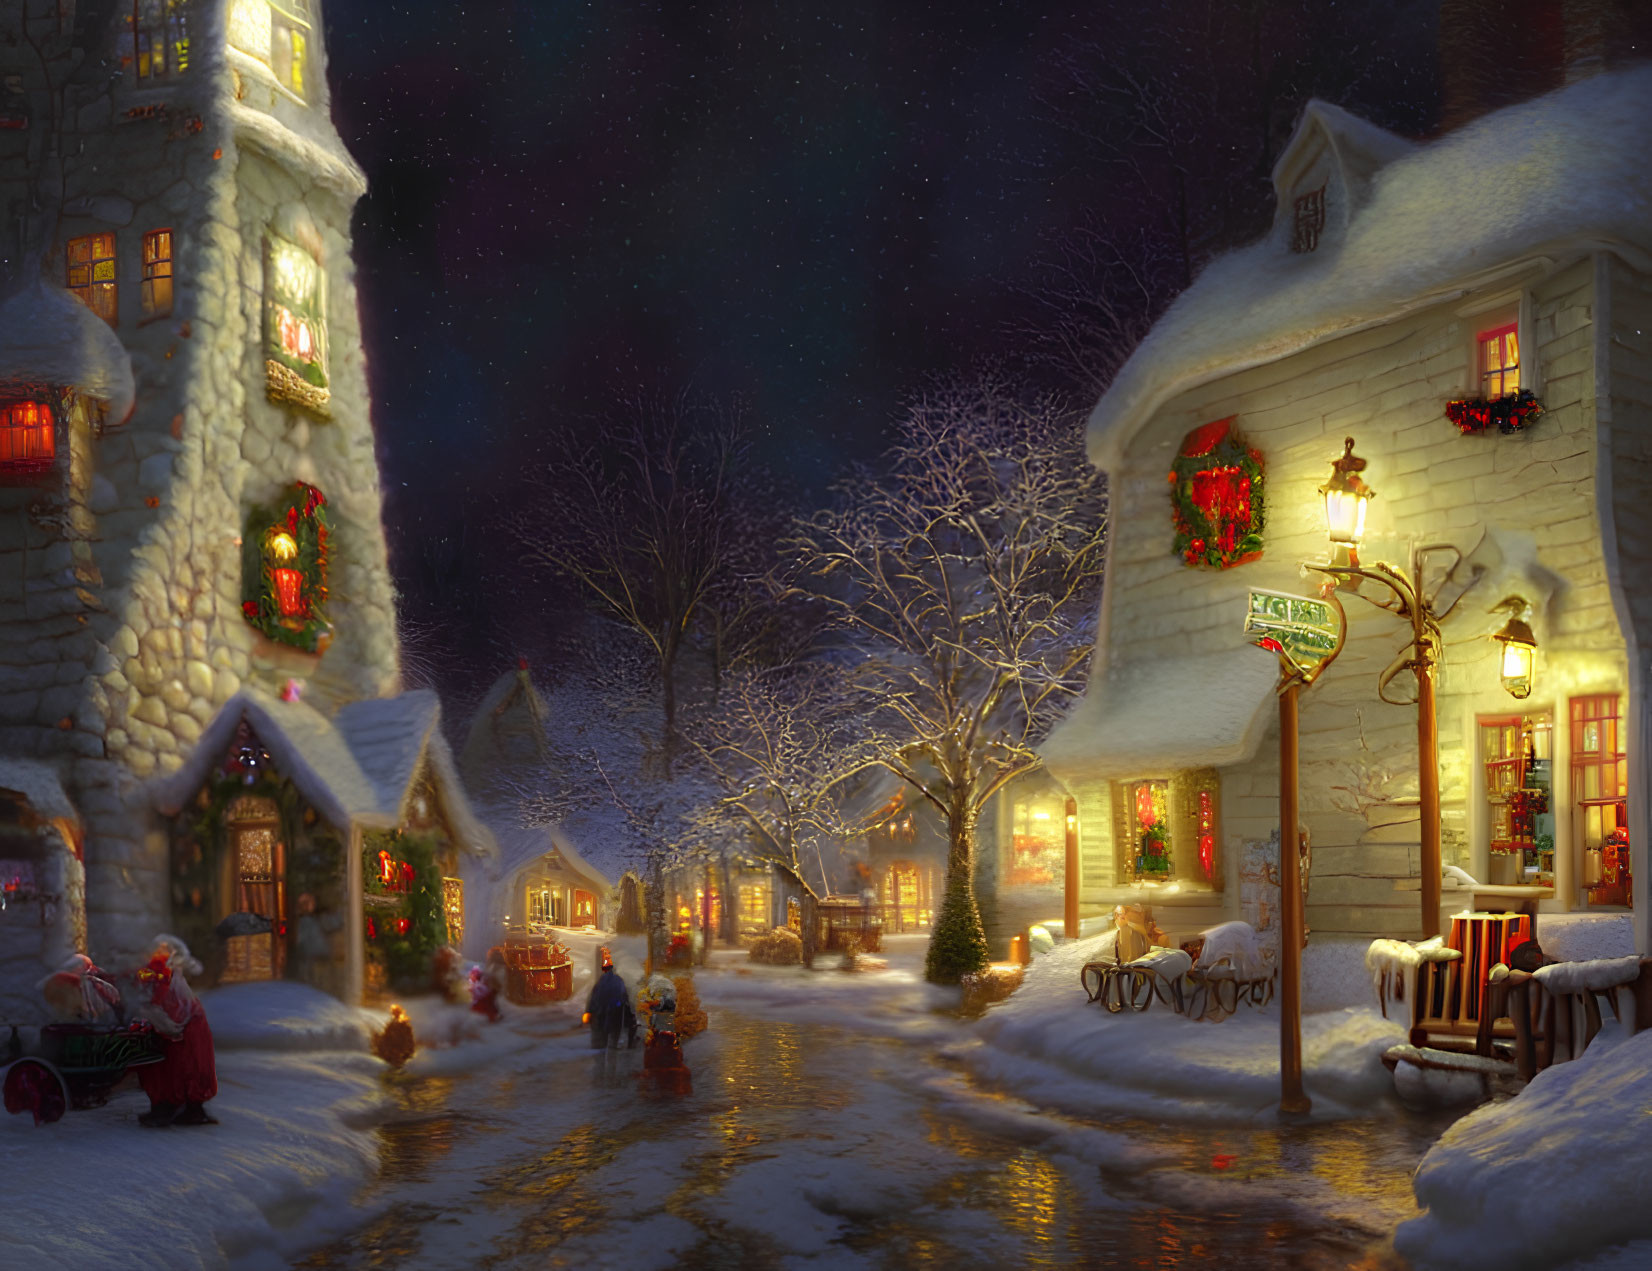 Snow-covered village with Christmas decorations under starry sky